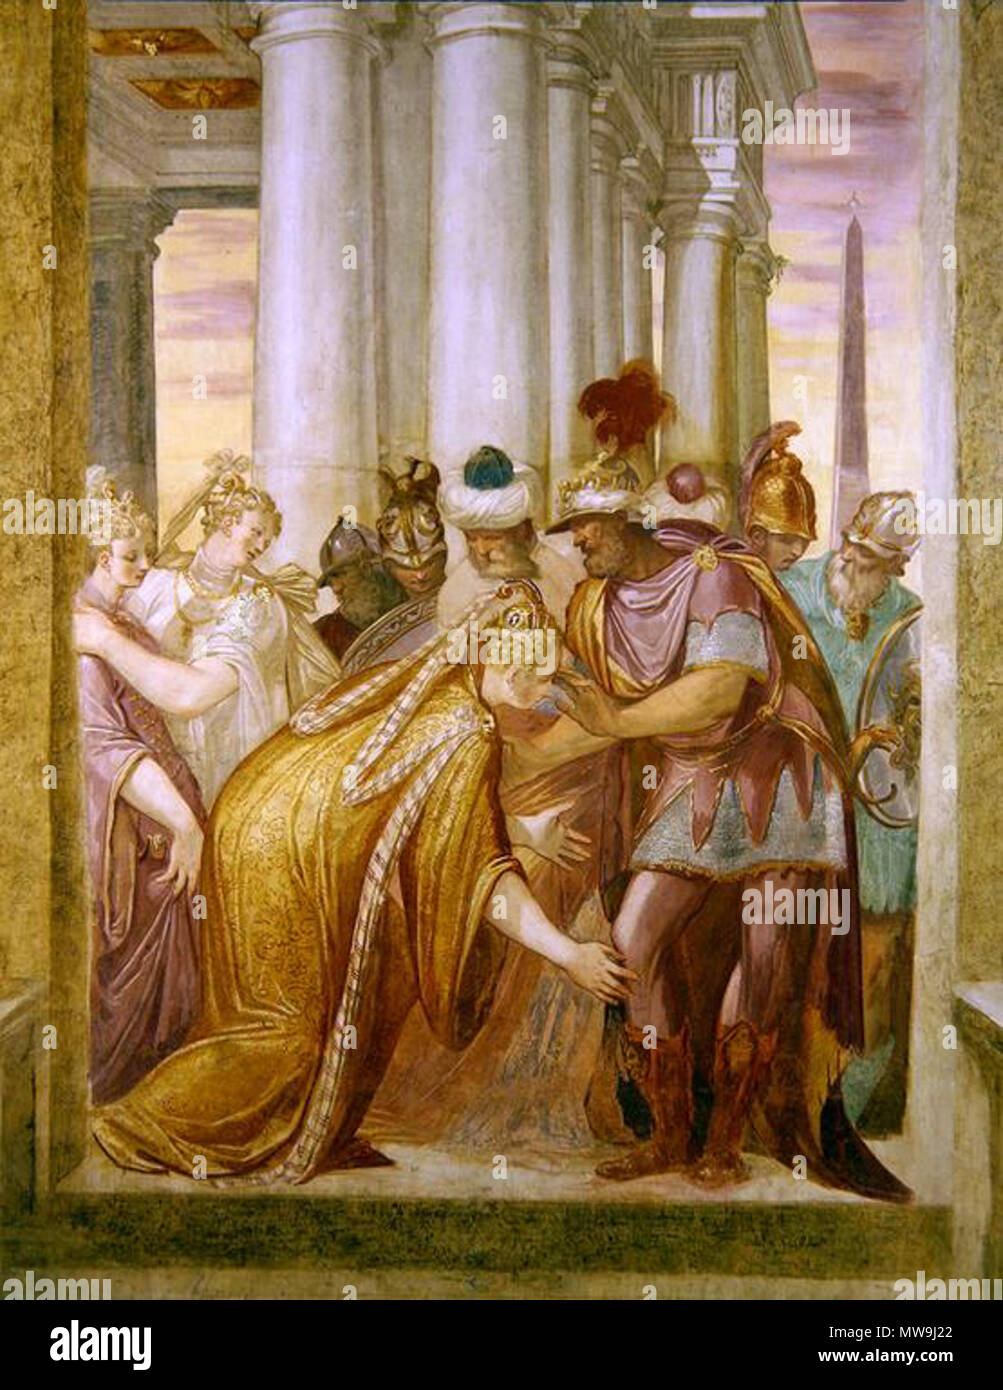 . parete centrale mostra la supplica di Sofonisba a Massinissa . Massinissa was king of Numidia and Sofonisba the daughter of his enemy and later his wife . C16  120 Central wall depicting Sophonisba requesting help from Massinissa (C16) Stock Photo